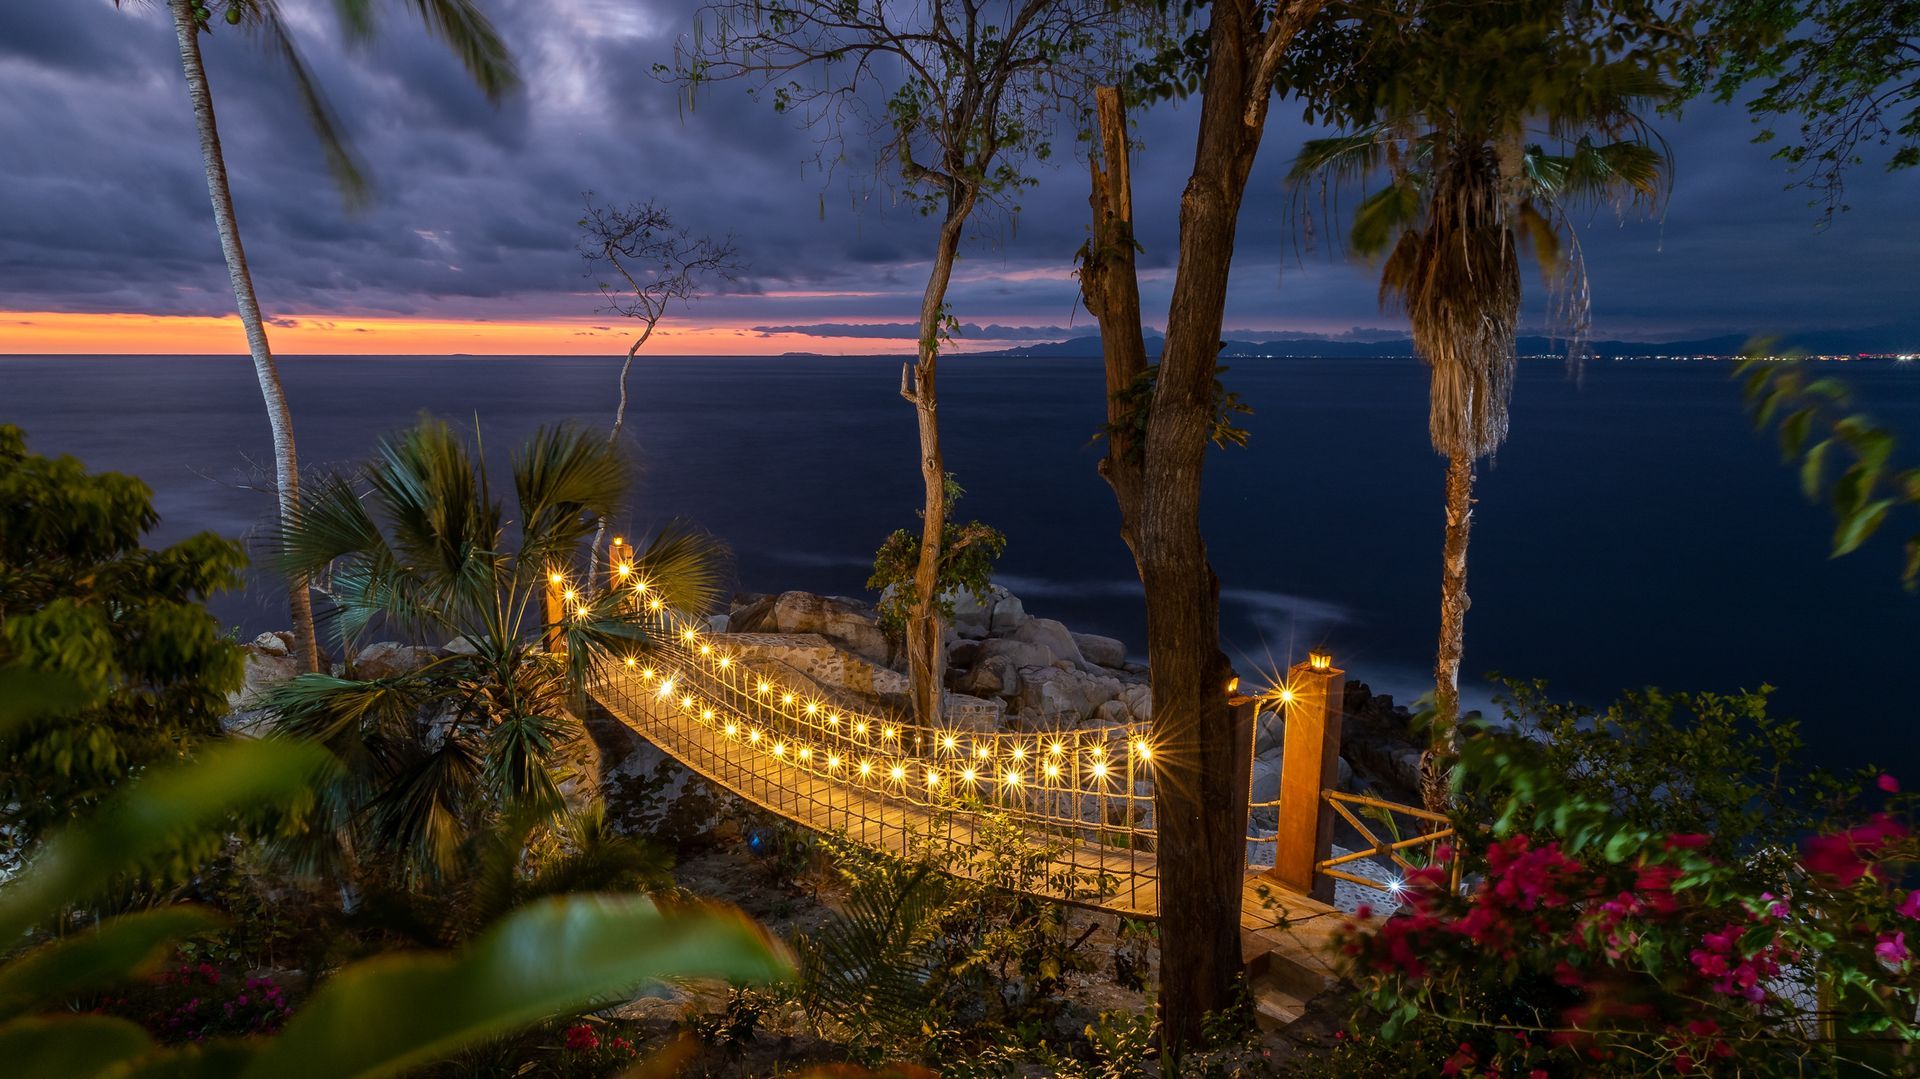 a hammock with lights hanging from trees overlooking the ocean at night